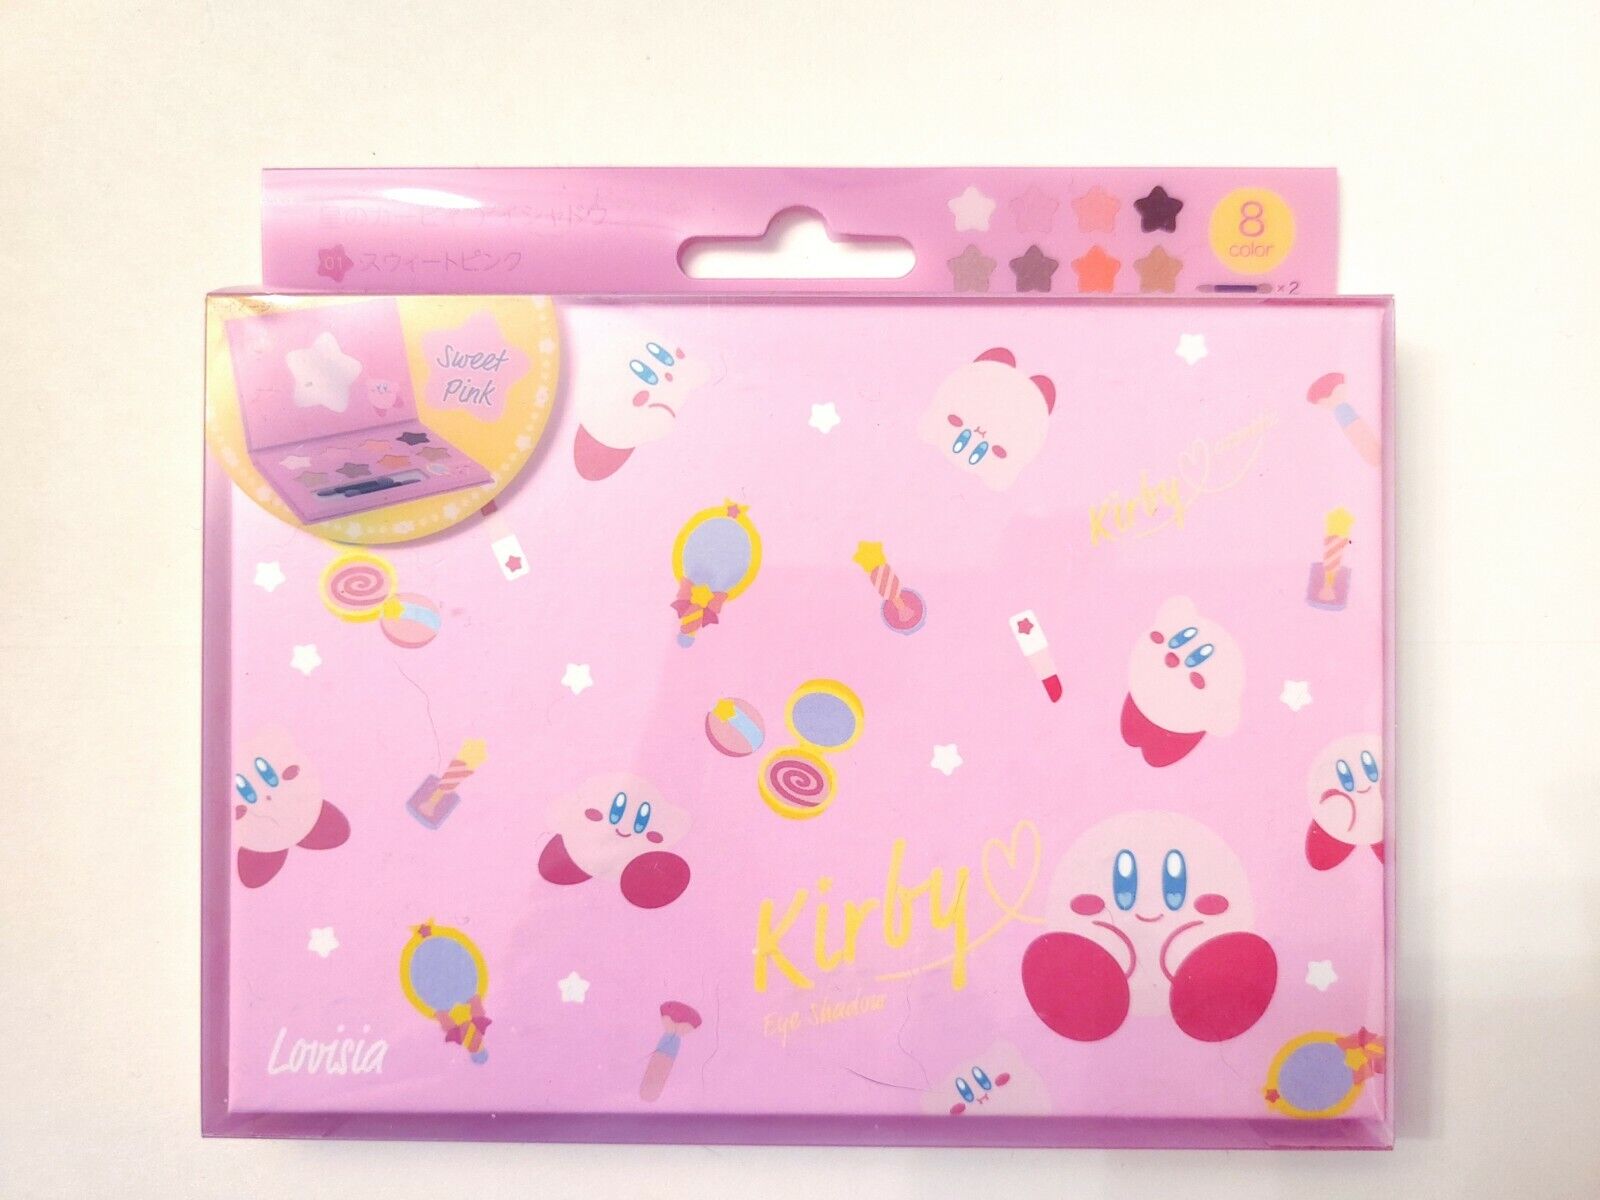 Lovisia Kirby of the Stars EyeShadow Palette 01 Sweet Pink Official From Japan